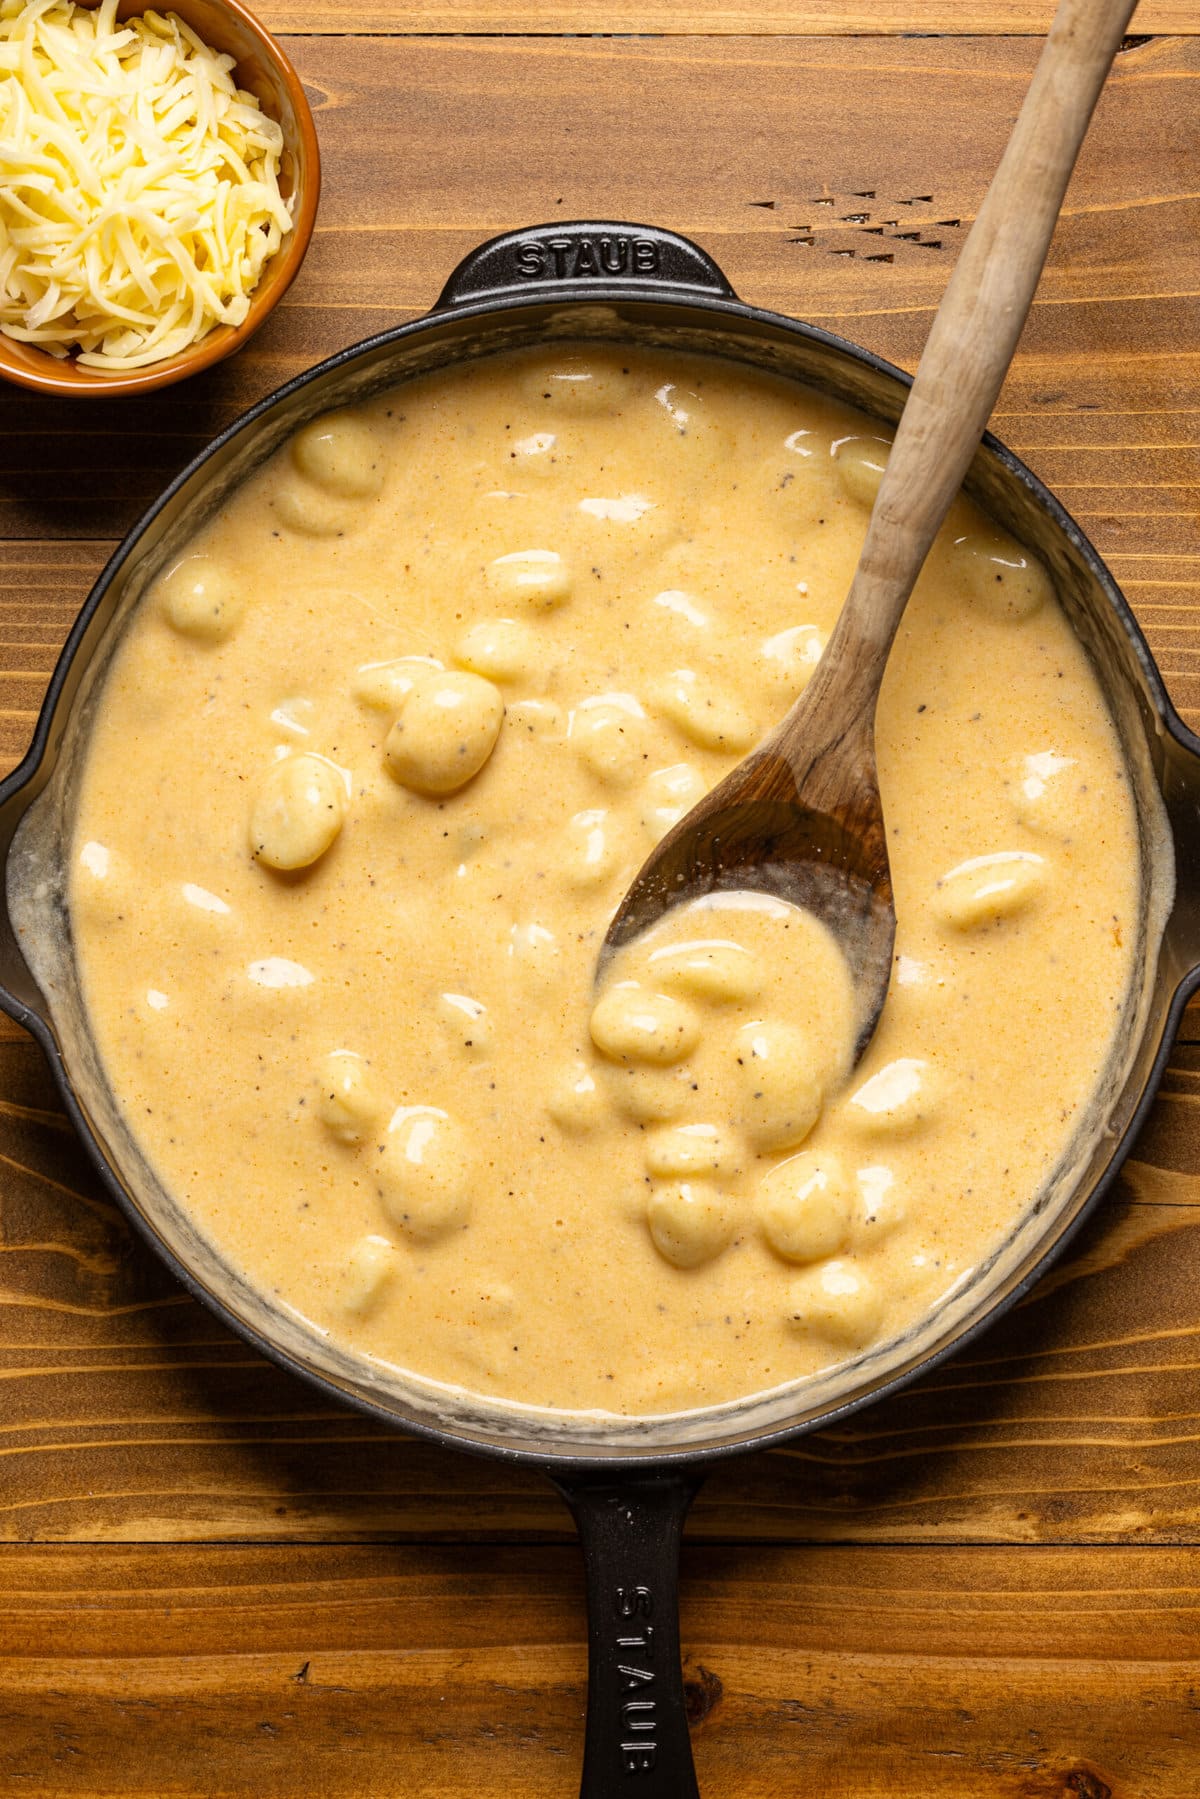 Gnocchi in cheese sauce in a black skillet.